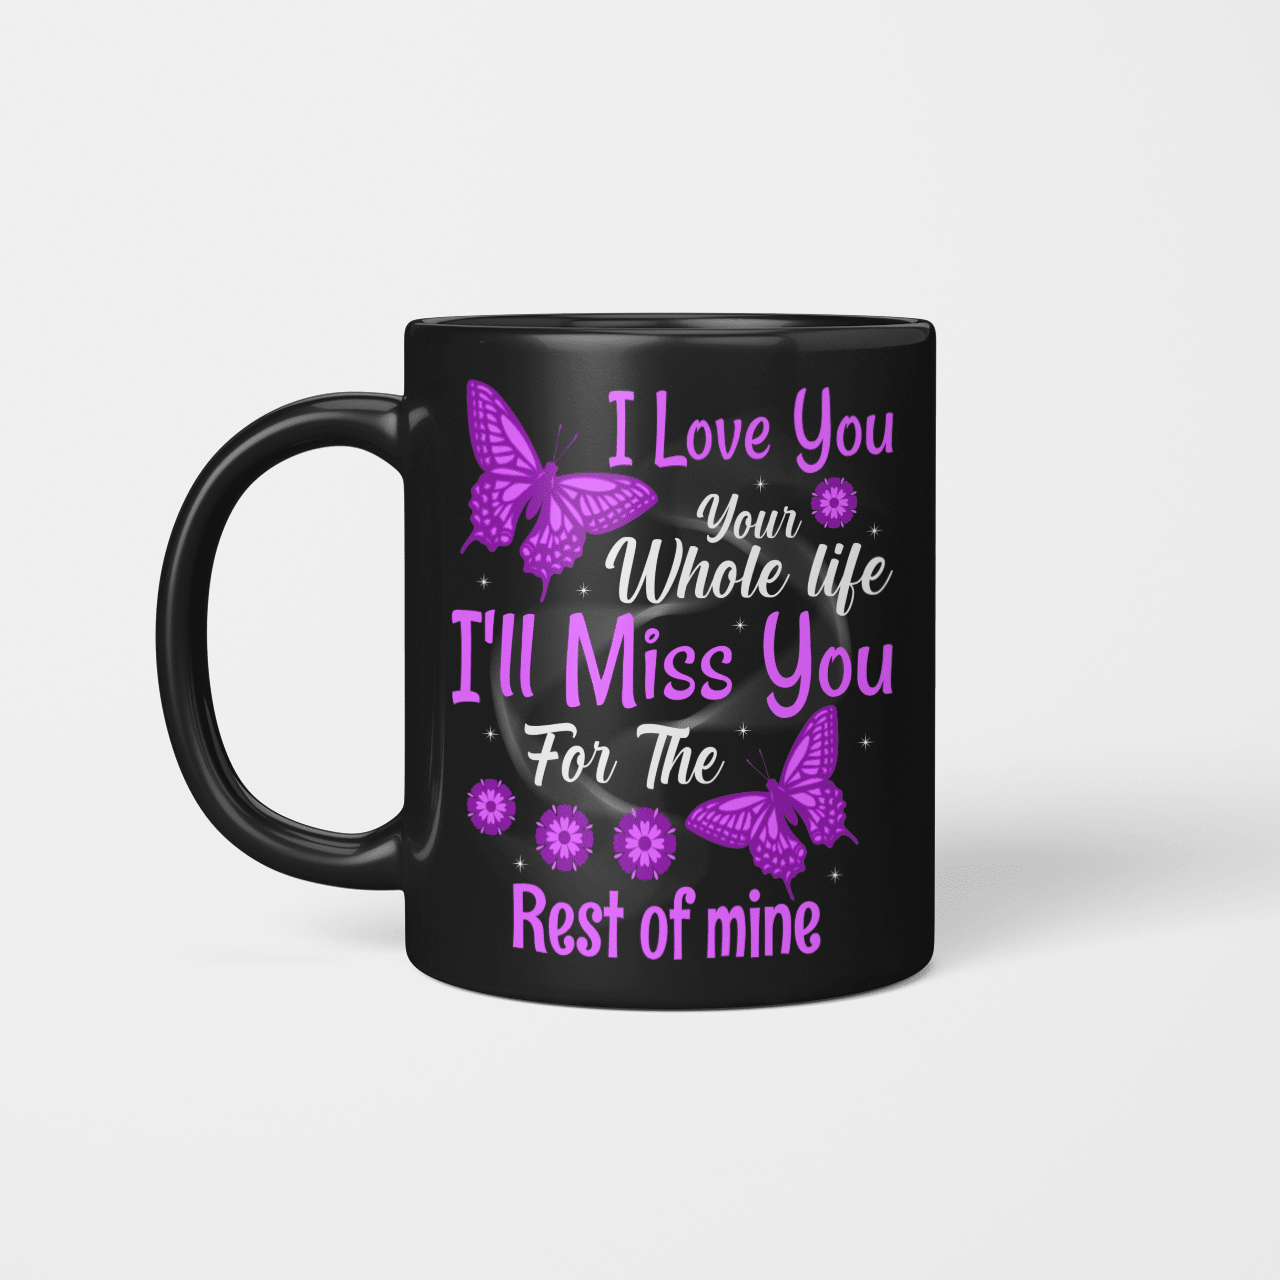 I Love You Your butterfly mug